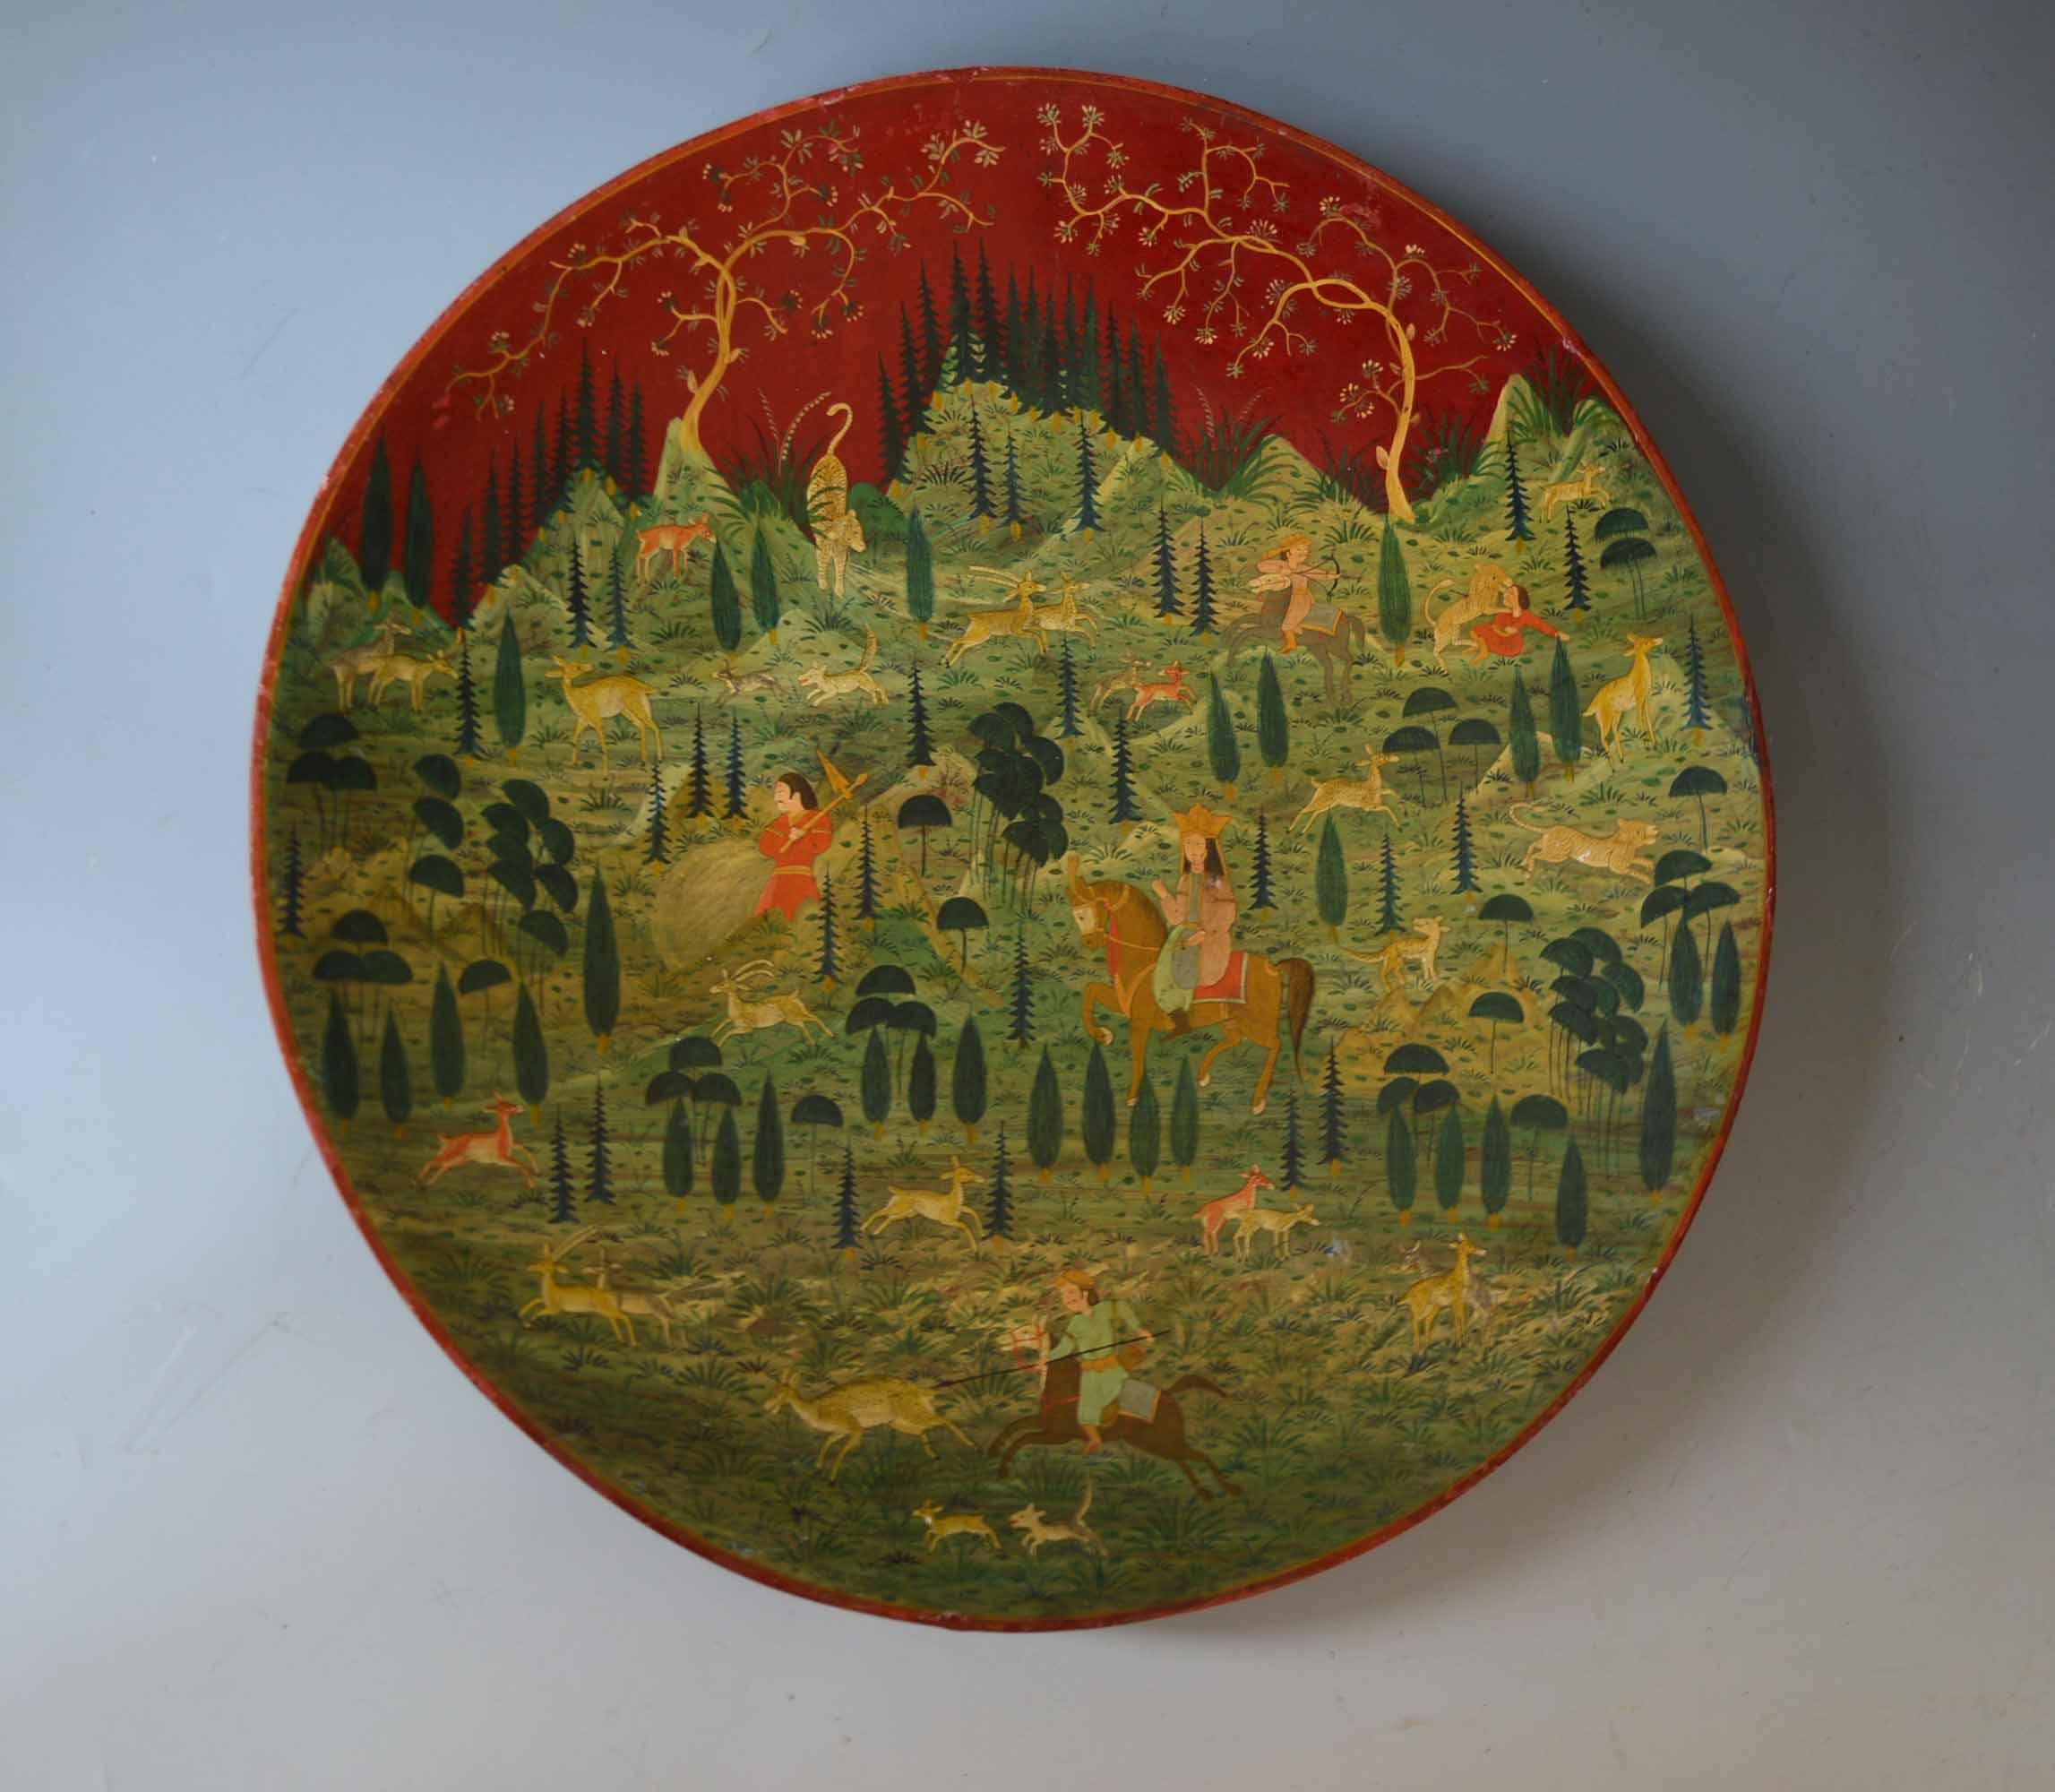 Fine Kashmiri Indo Persian Mughal Painted Wall Plate Interior Design Asian Antiques

A large very fine Kashmiri Indo Persian style hand-painted papier Mache plate featuring an elaborate hunting scene with a deer and wild feline attacking persons,